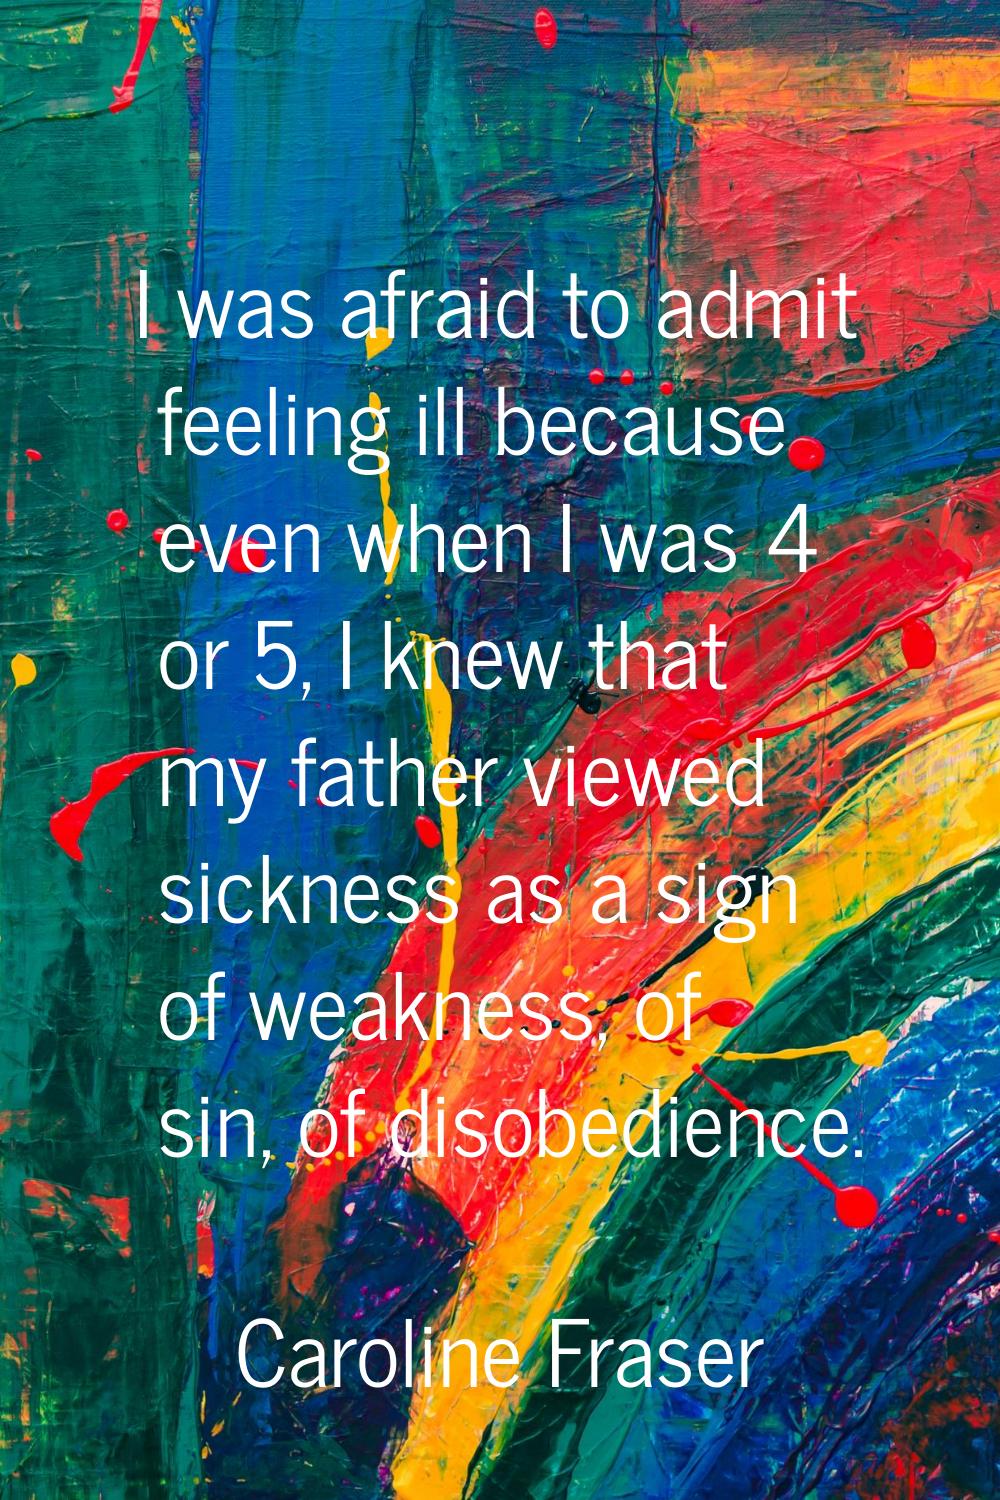 I was afraid to admit feeling ill because even when I was 4 or 5, I knew that my father viewed sick